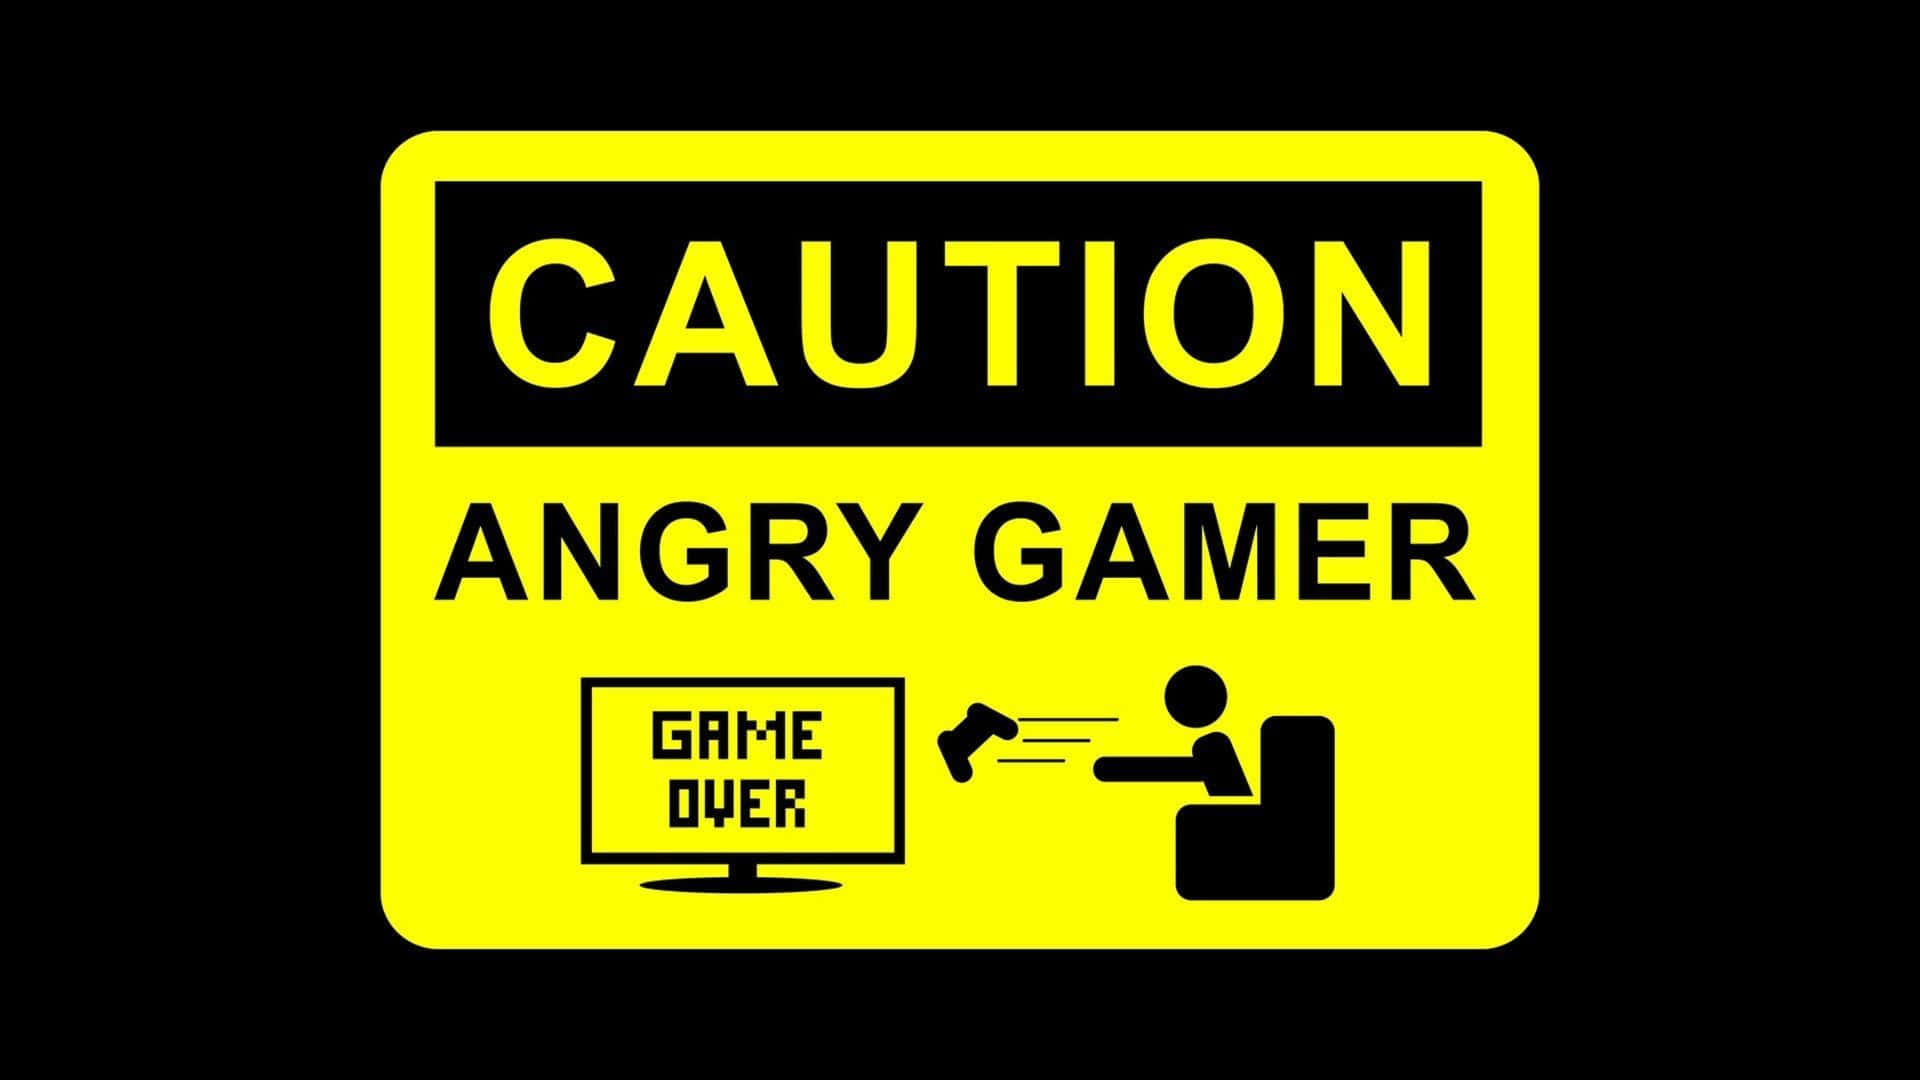 Hilarious Gamer in Action with Funny Facial Expression Wallpaper